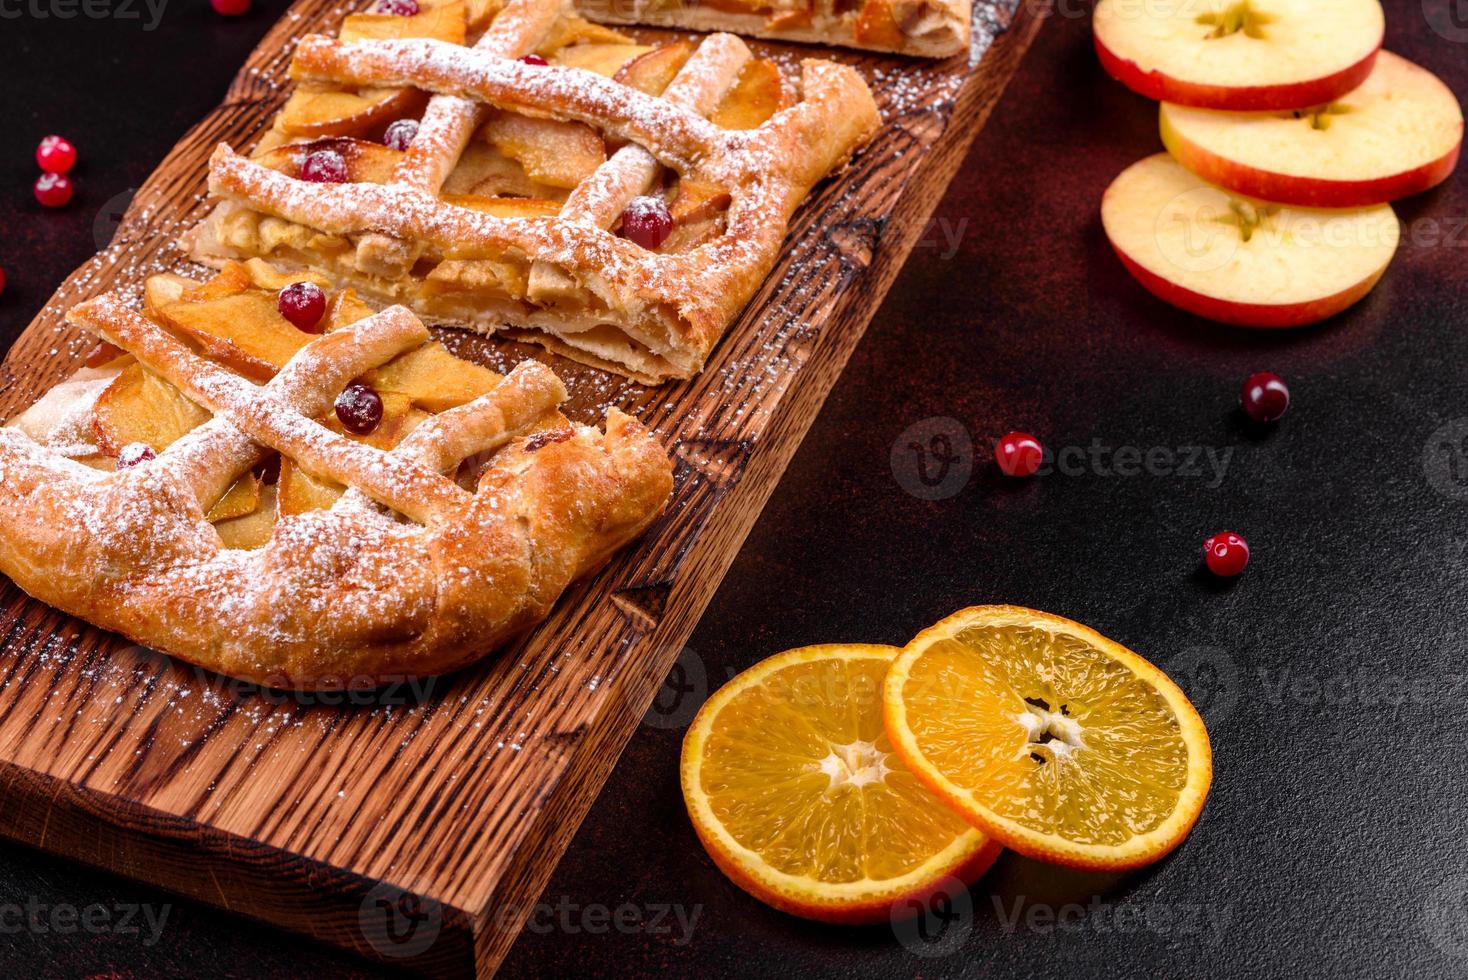 Delicious fresh pie baked with apple, pears and berries photo